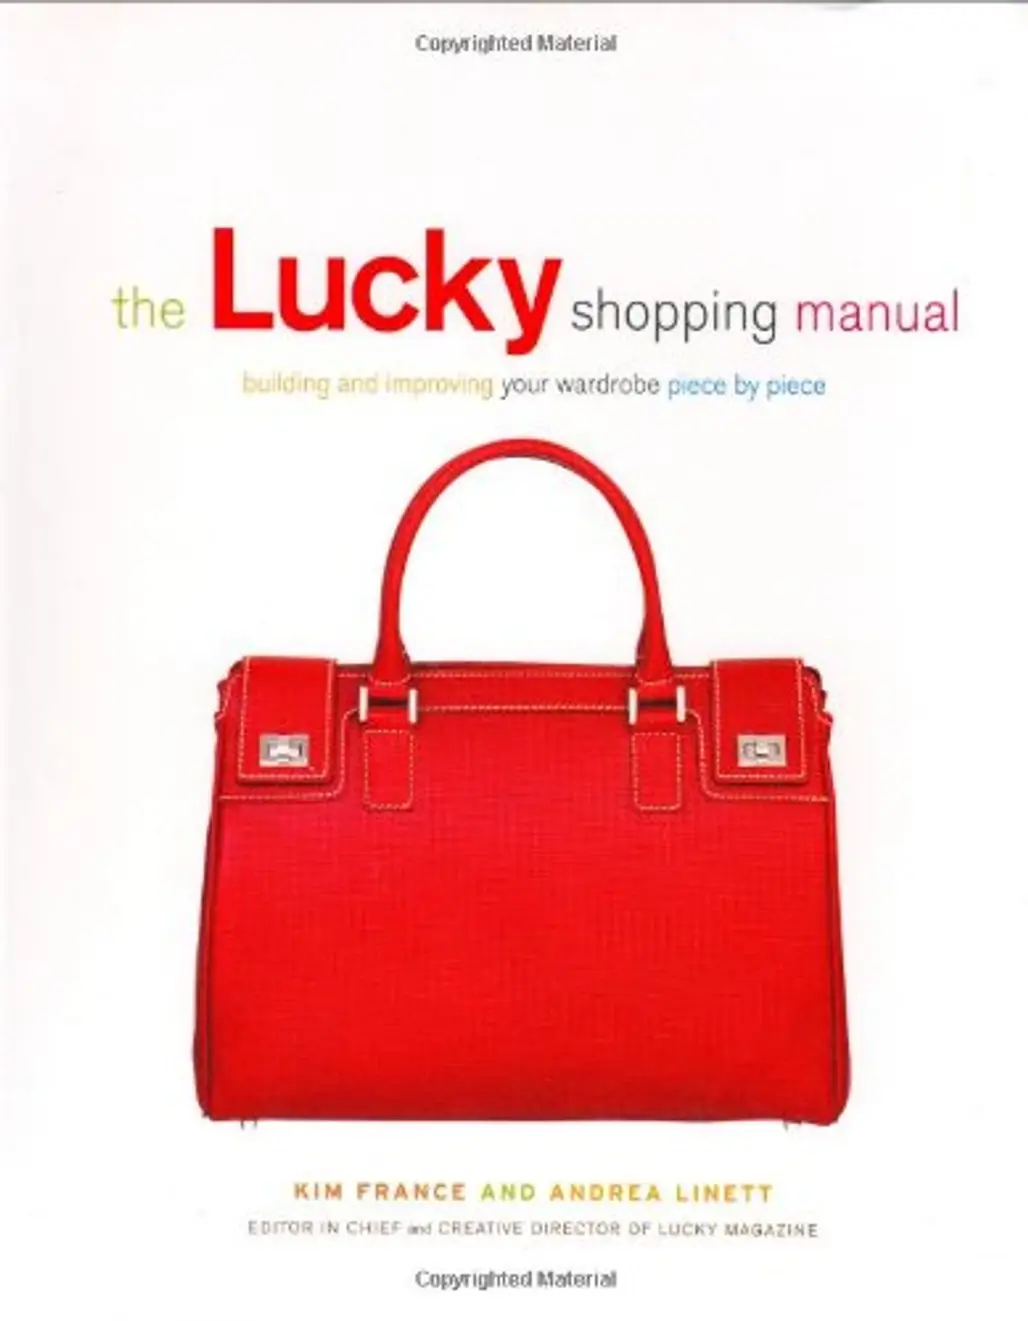 The Lucky Shopping Manual: Building and Improving Your Wardrobe Piece by Piece by Andrea Linett and Kim France